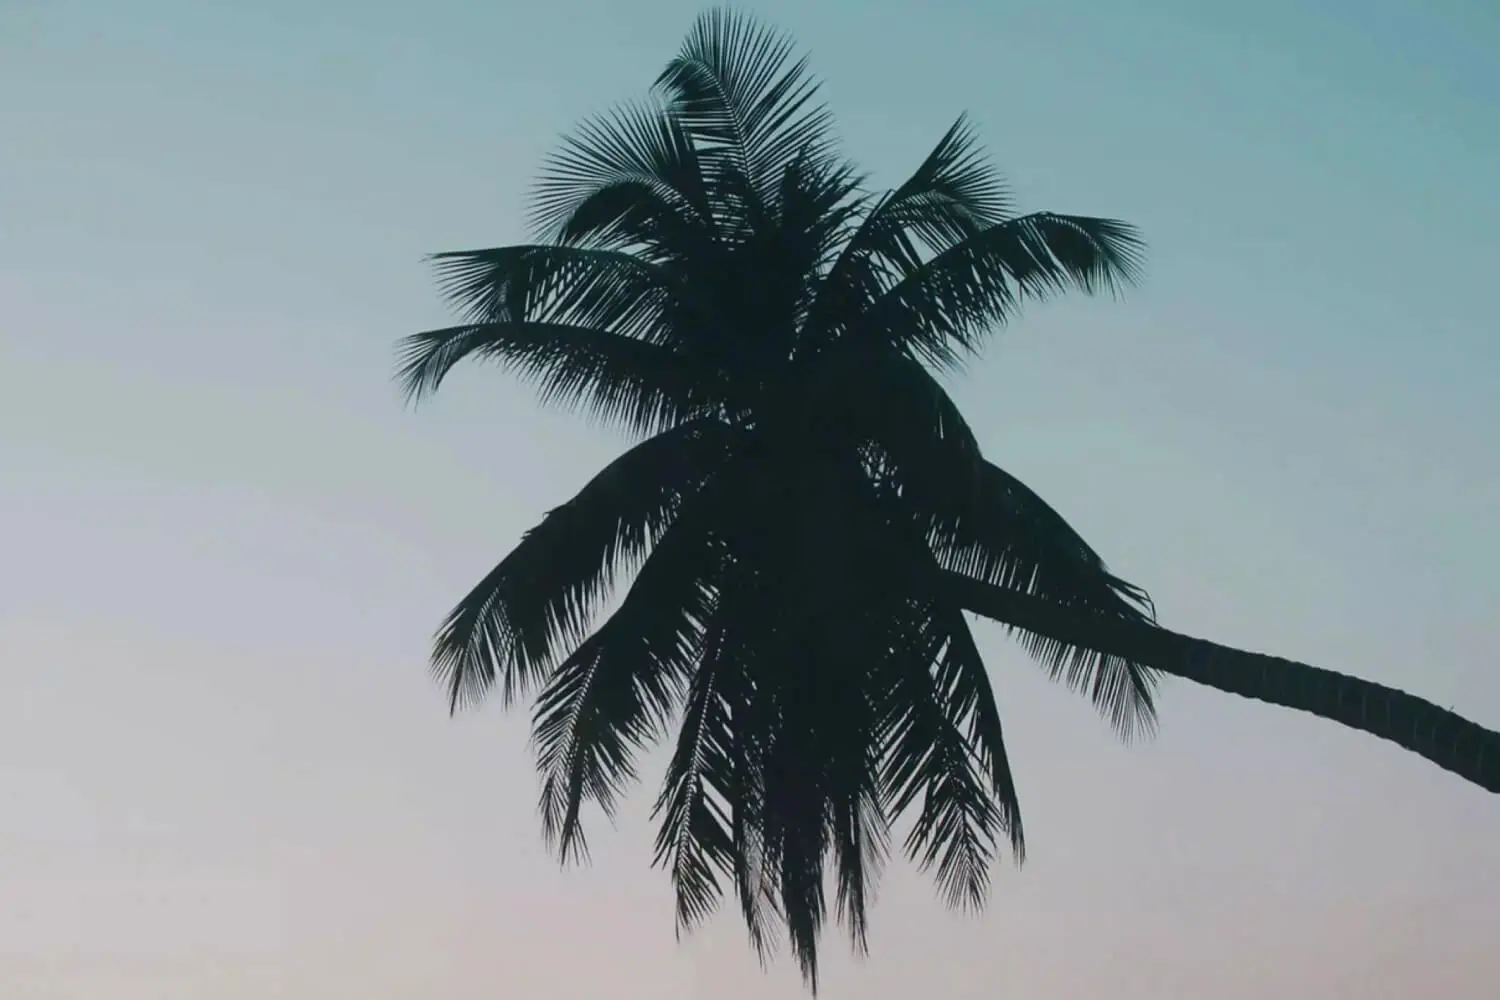 A thriving palm tree at sunset